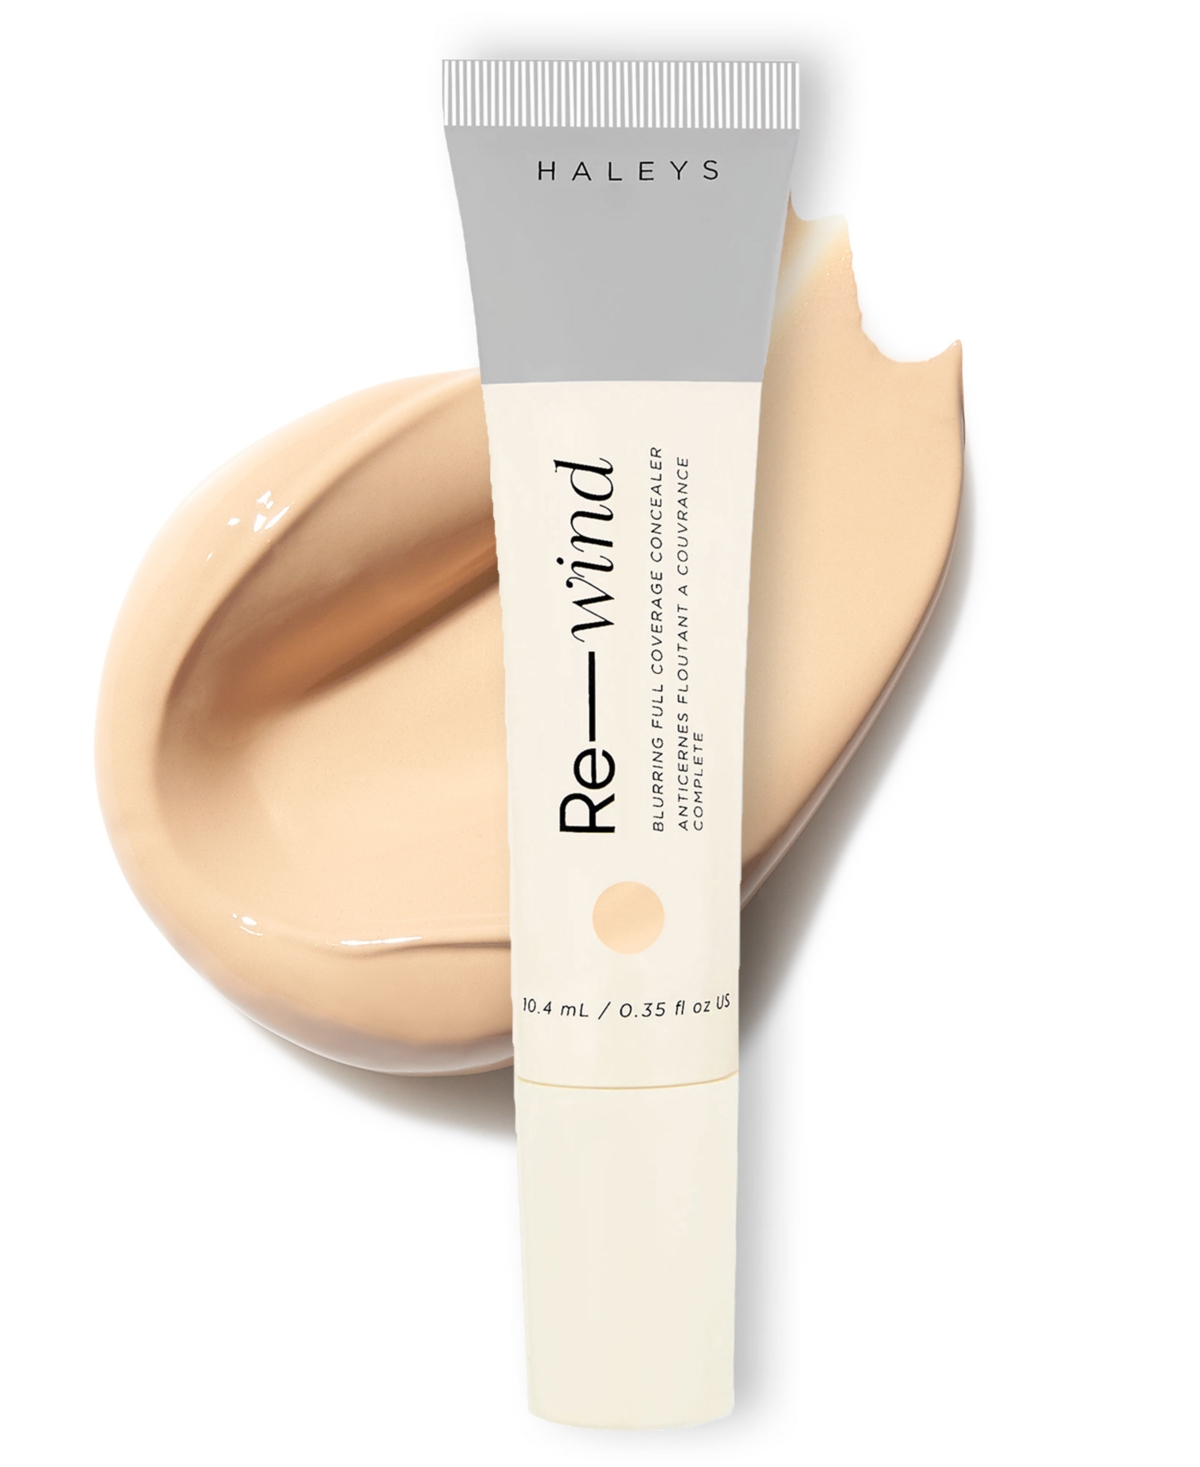 Haleys Beauty Re-wind Blurring Full Coverage Concealer In Light - Neutral